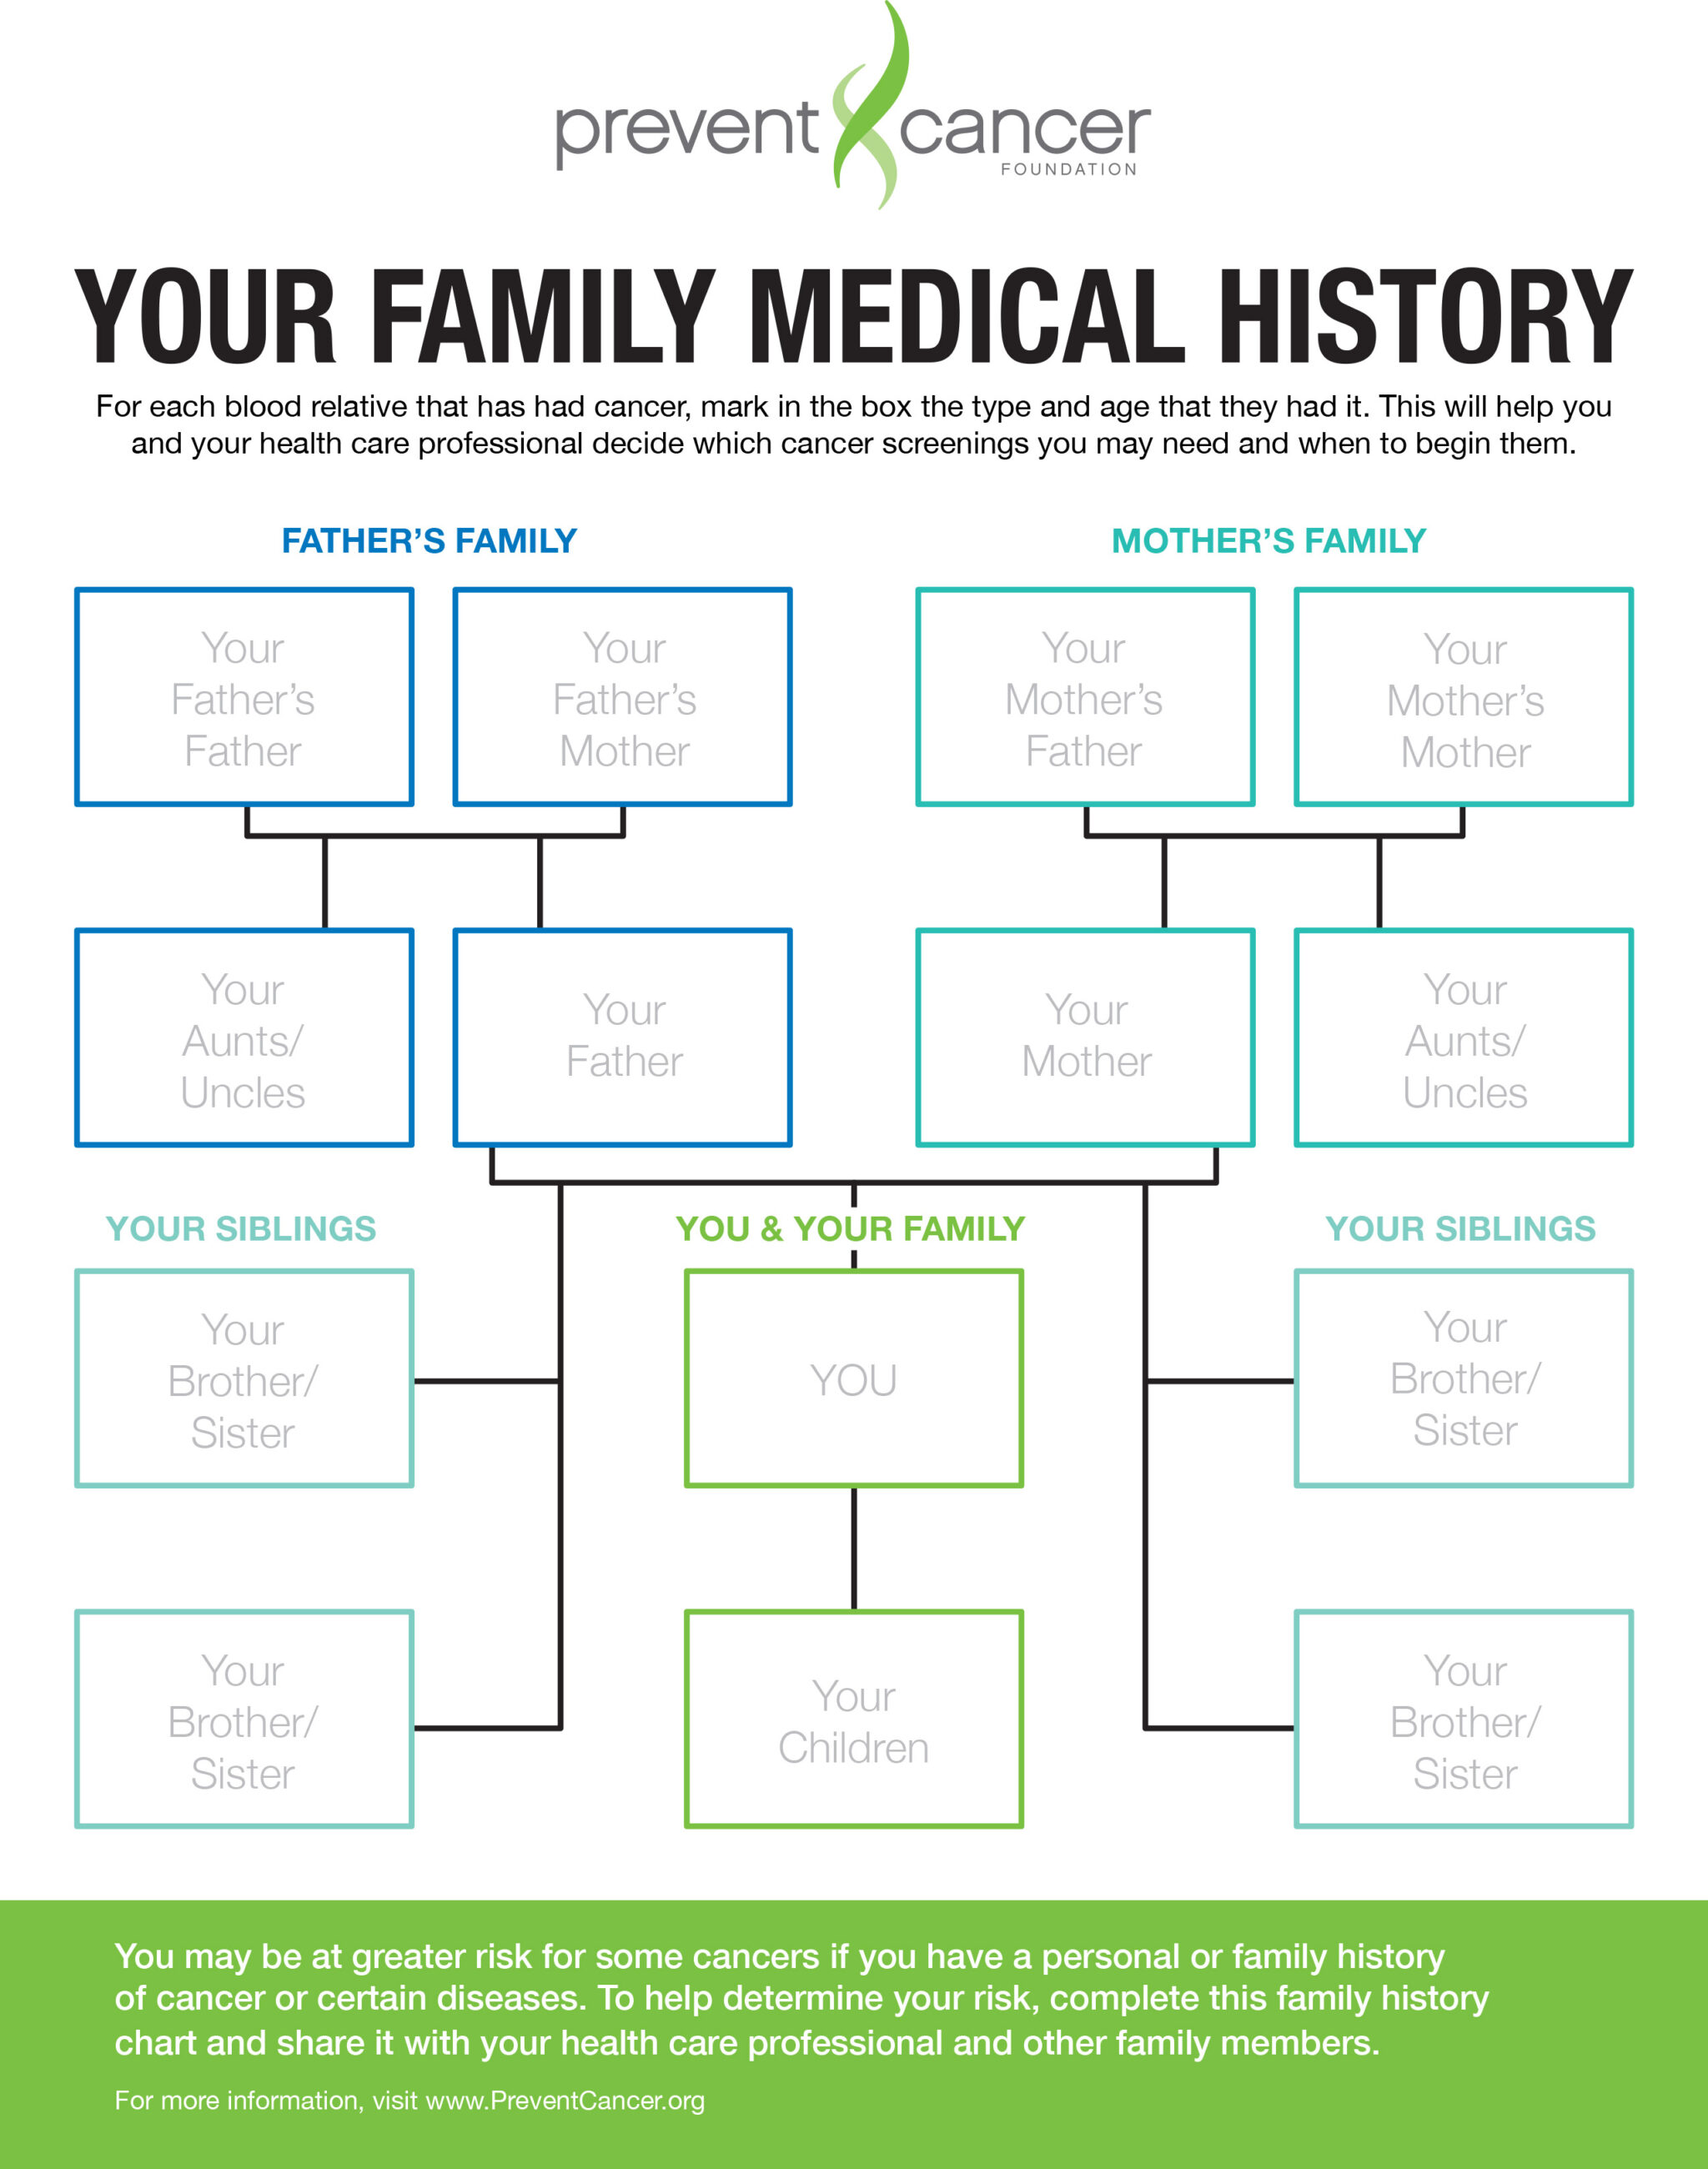  Family  History  Prevent Cancer Foundation